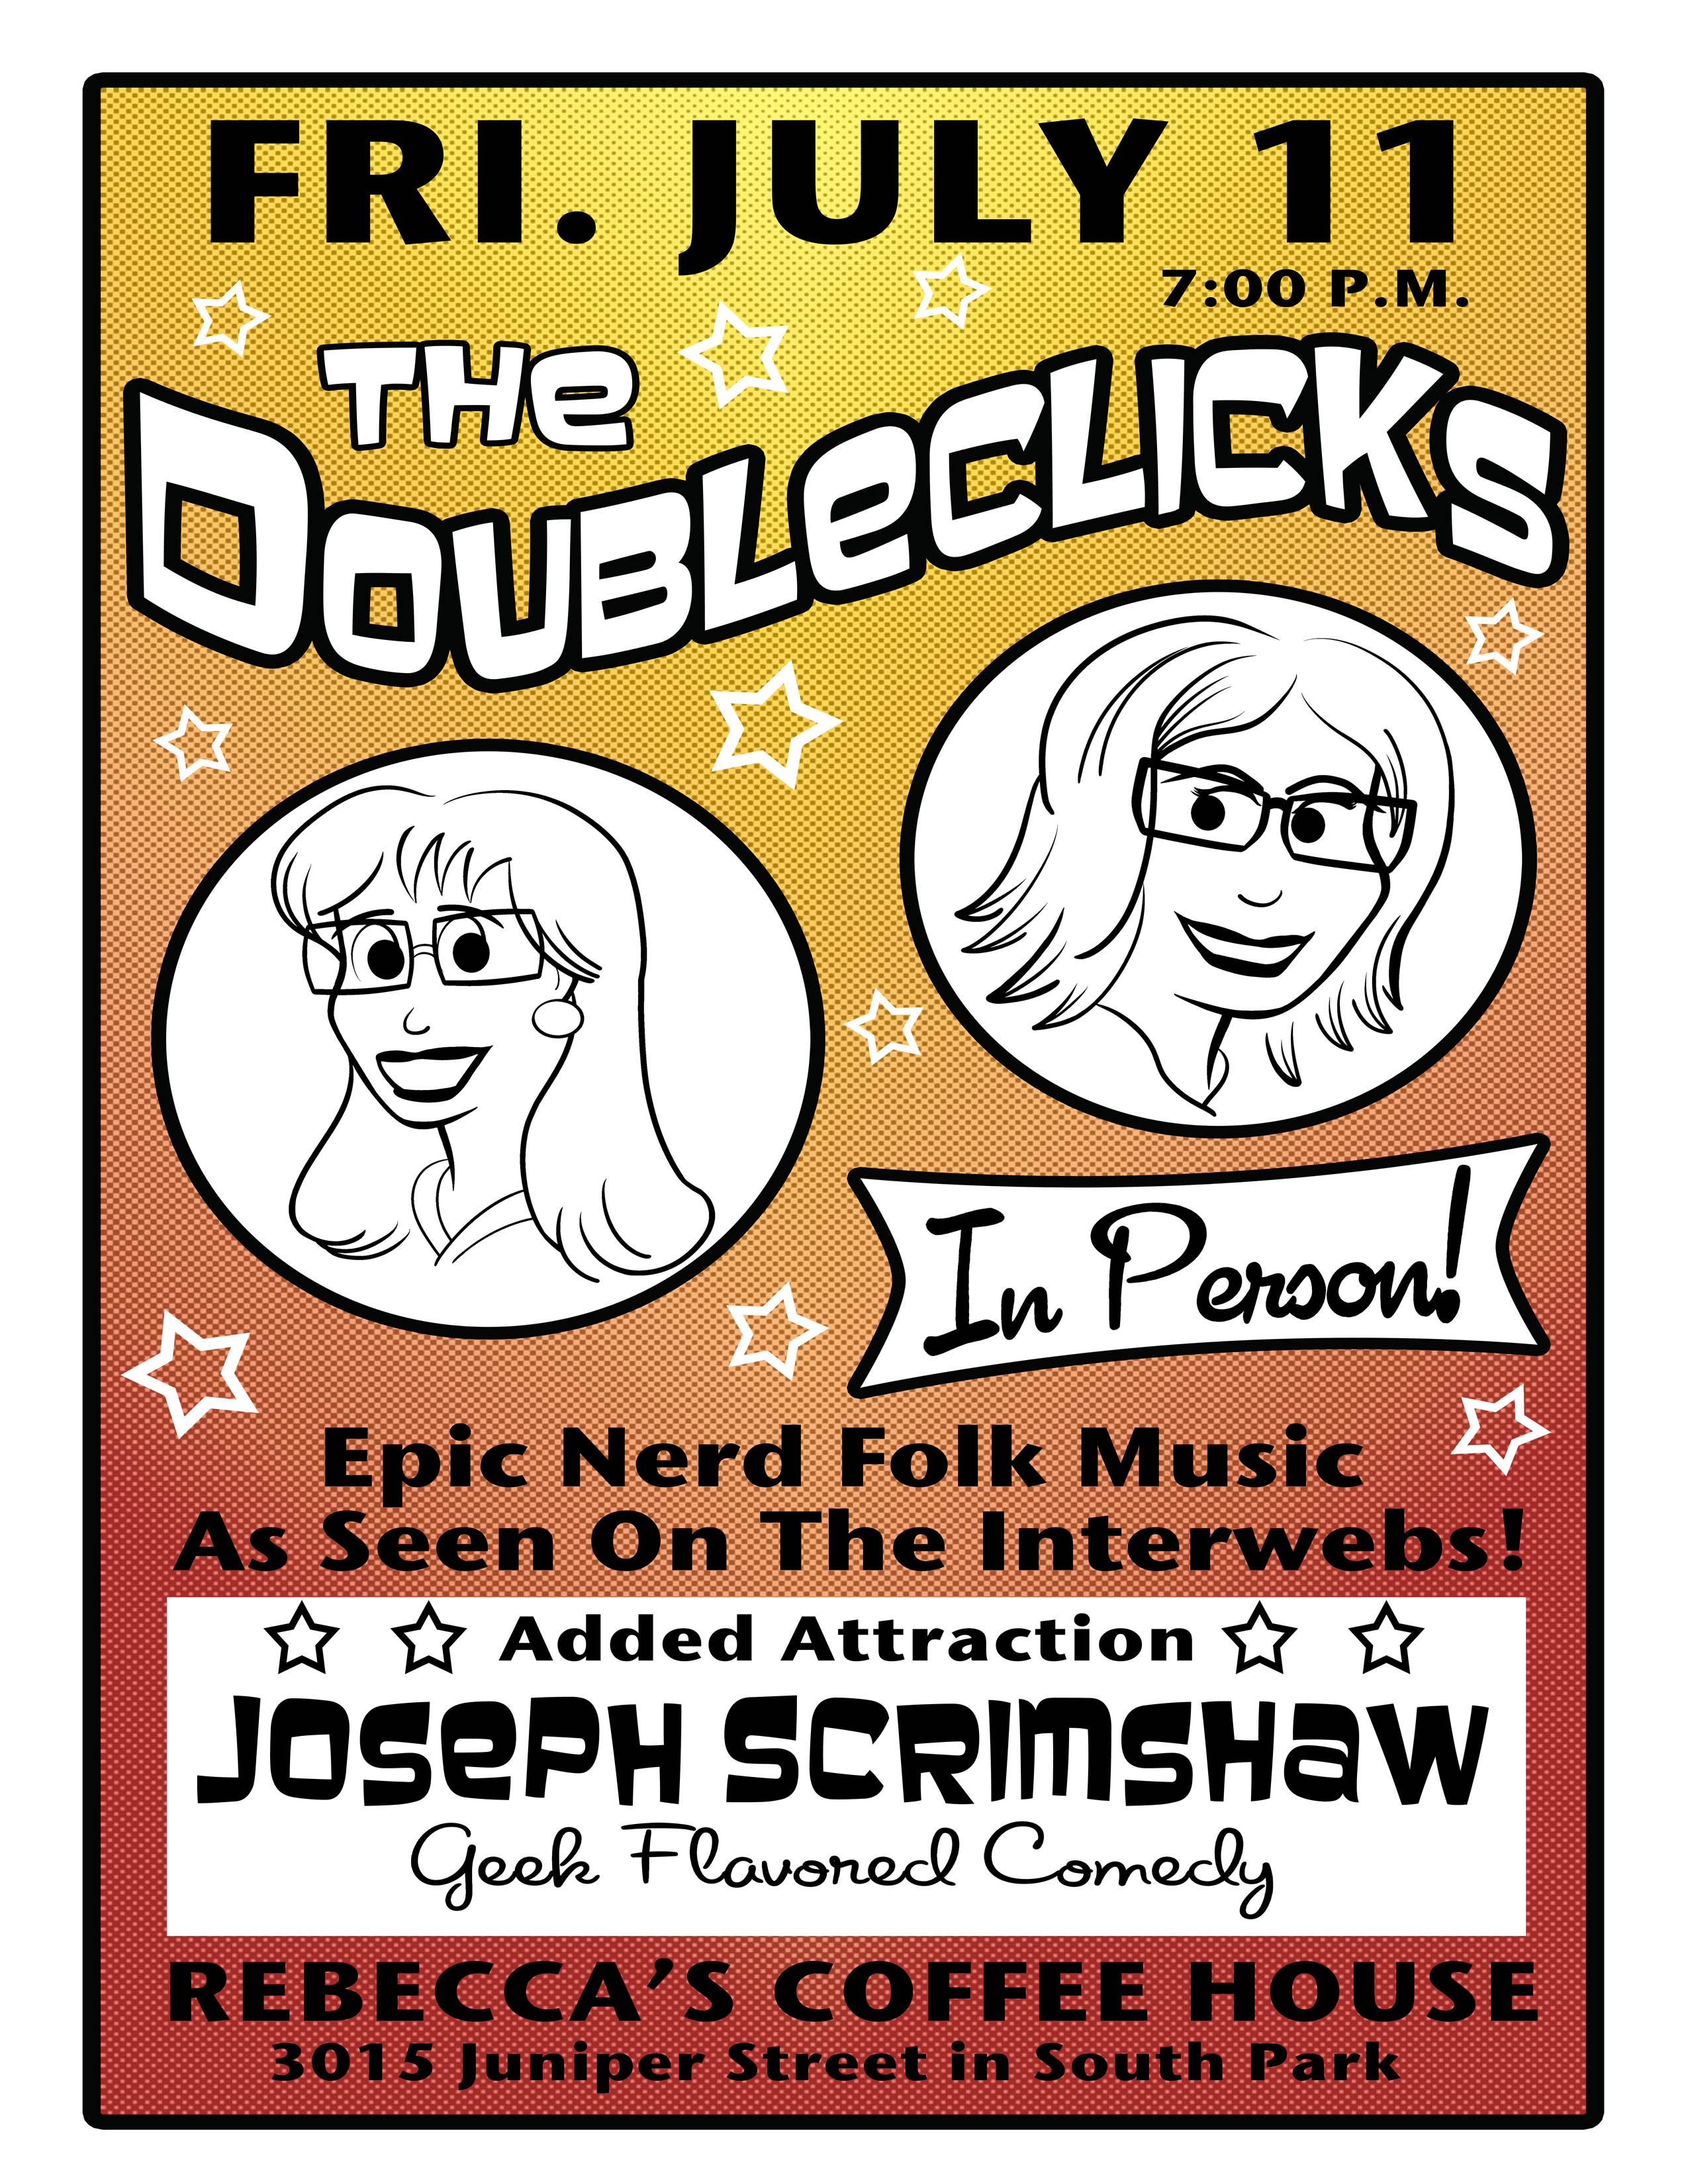 Poster for the Doubleclicks show by Rebecca Hicks